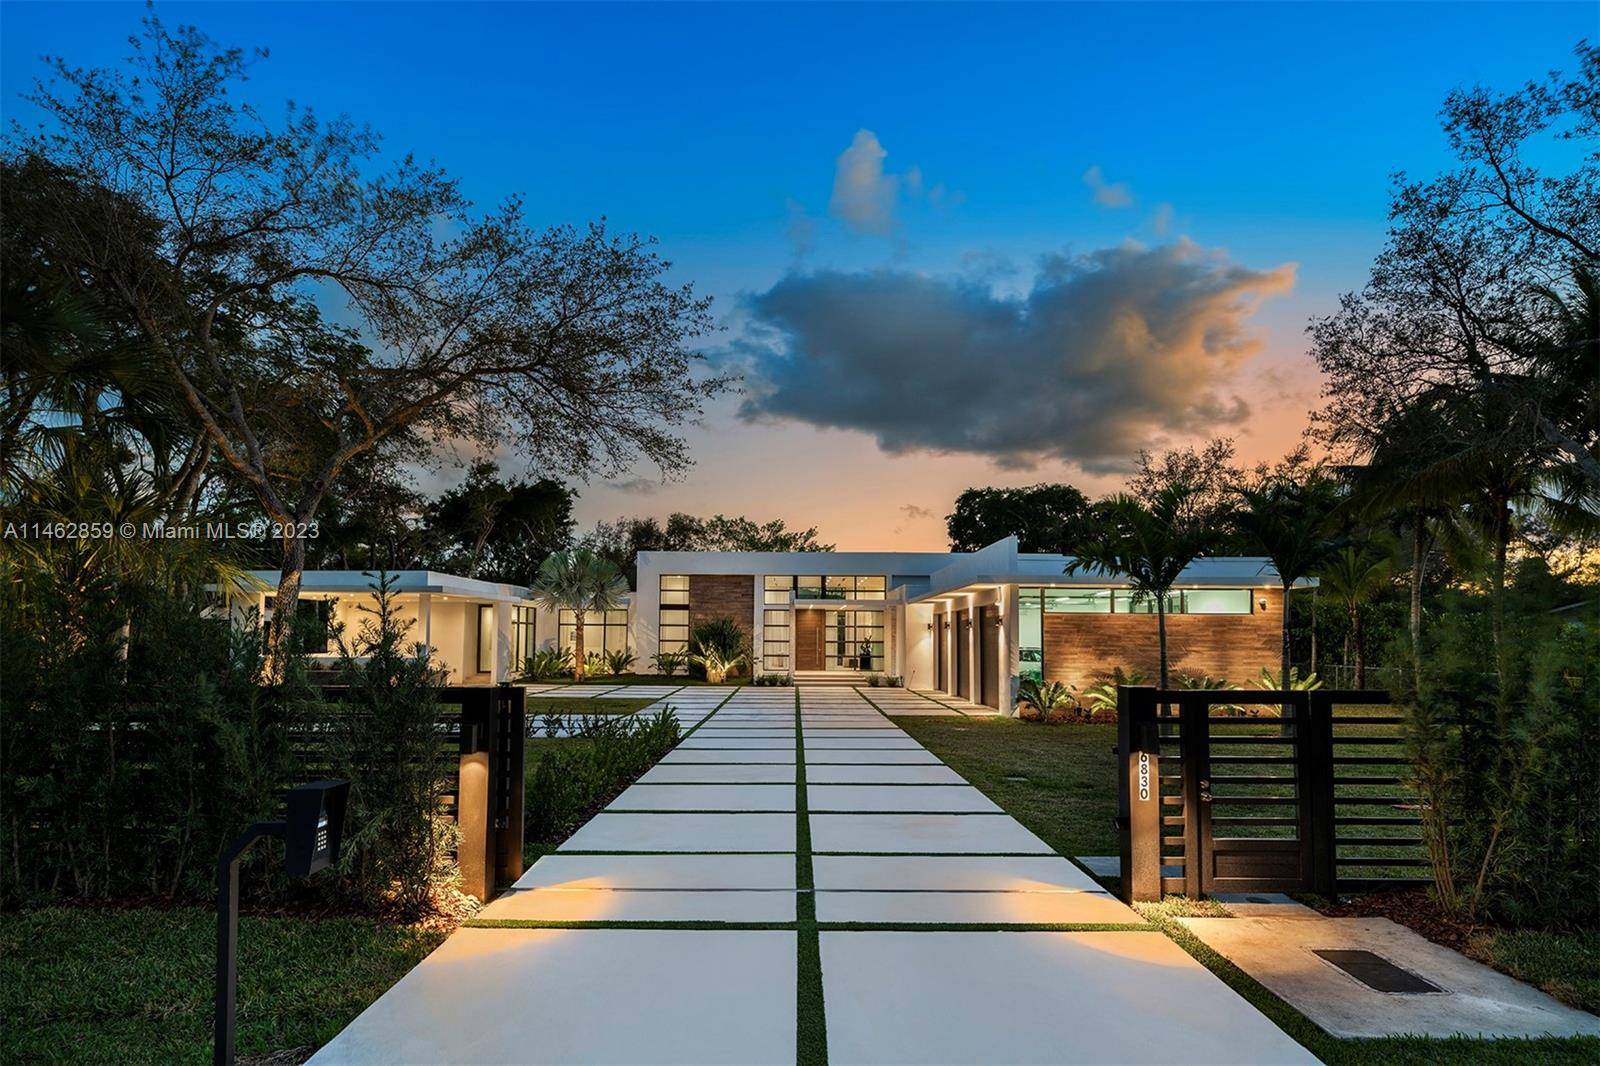 Luxury living awaits in this stunning 2022 modern estate in Pinecrest offering state of the art construction and impeccable finishes.